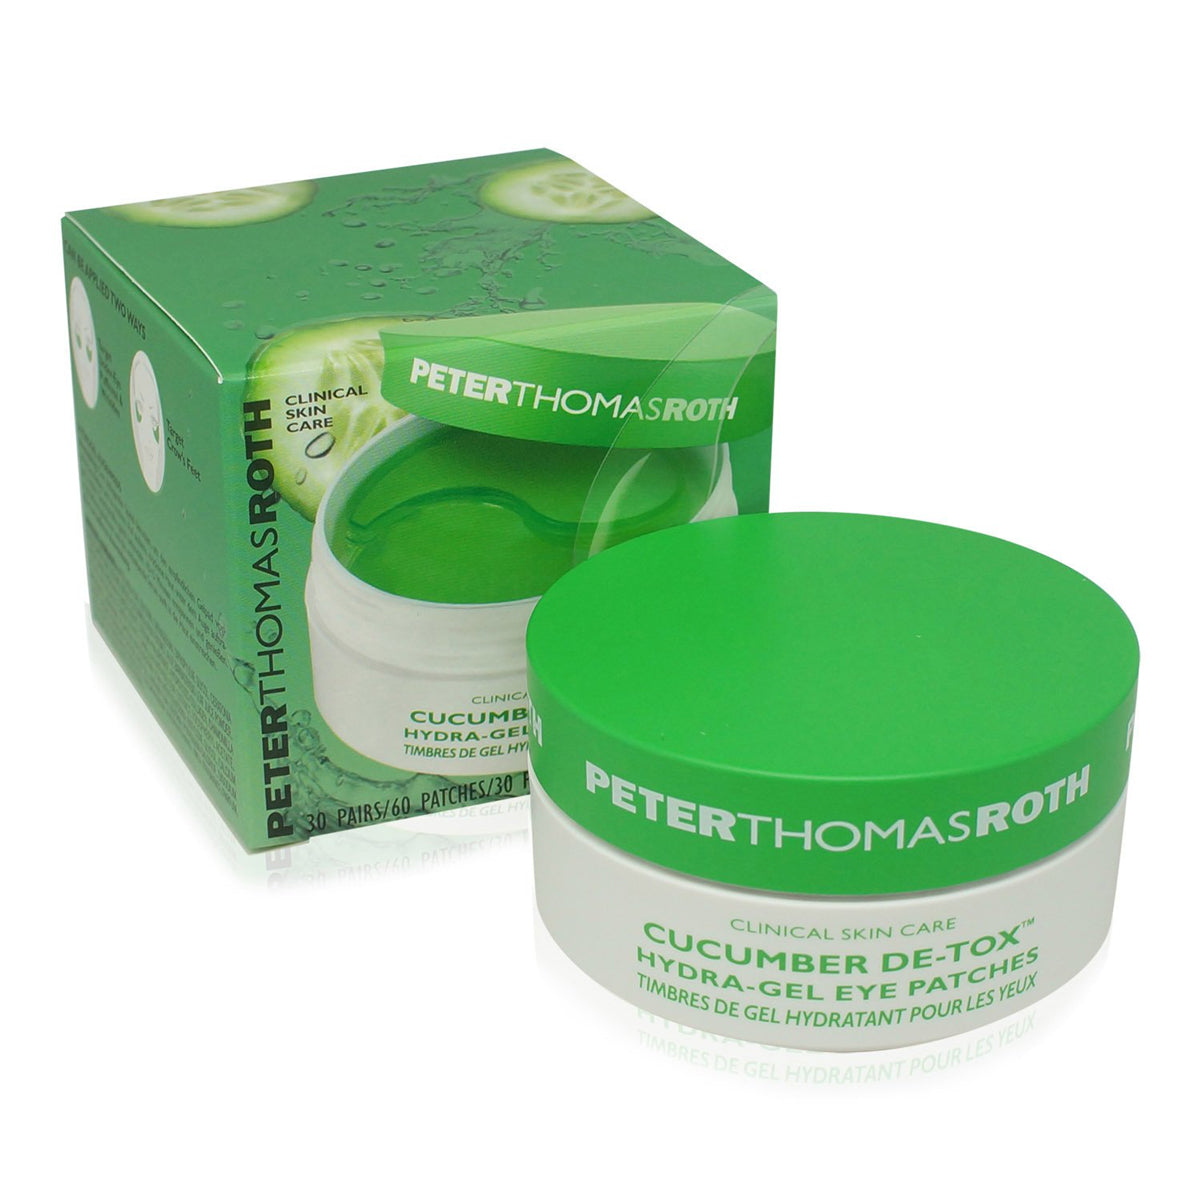 Peter Thomas Roth Cucumber De-Tox Hydra-Gel Eye Patches 60 Patches P1